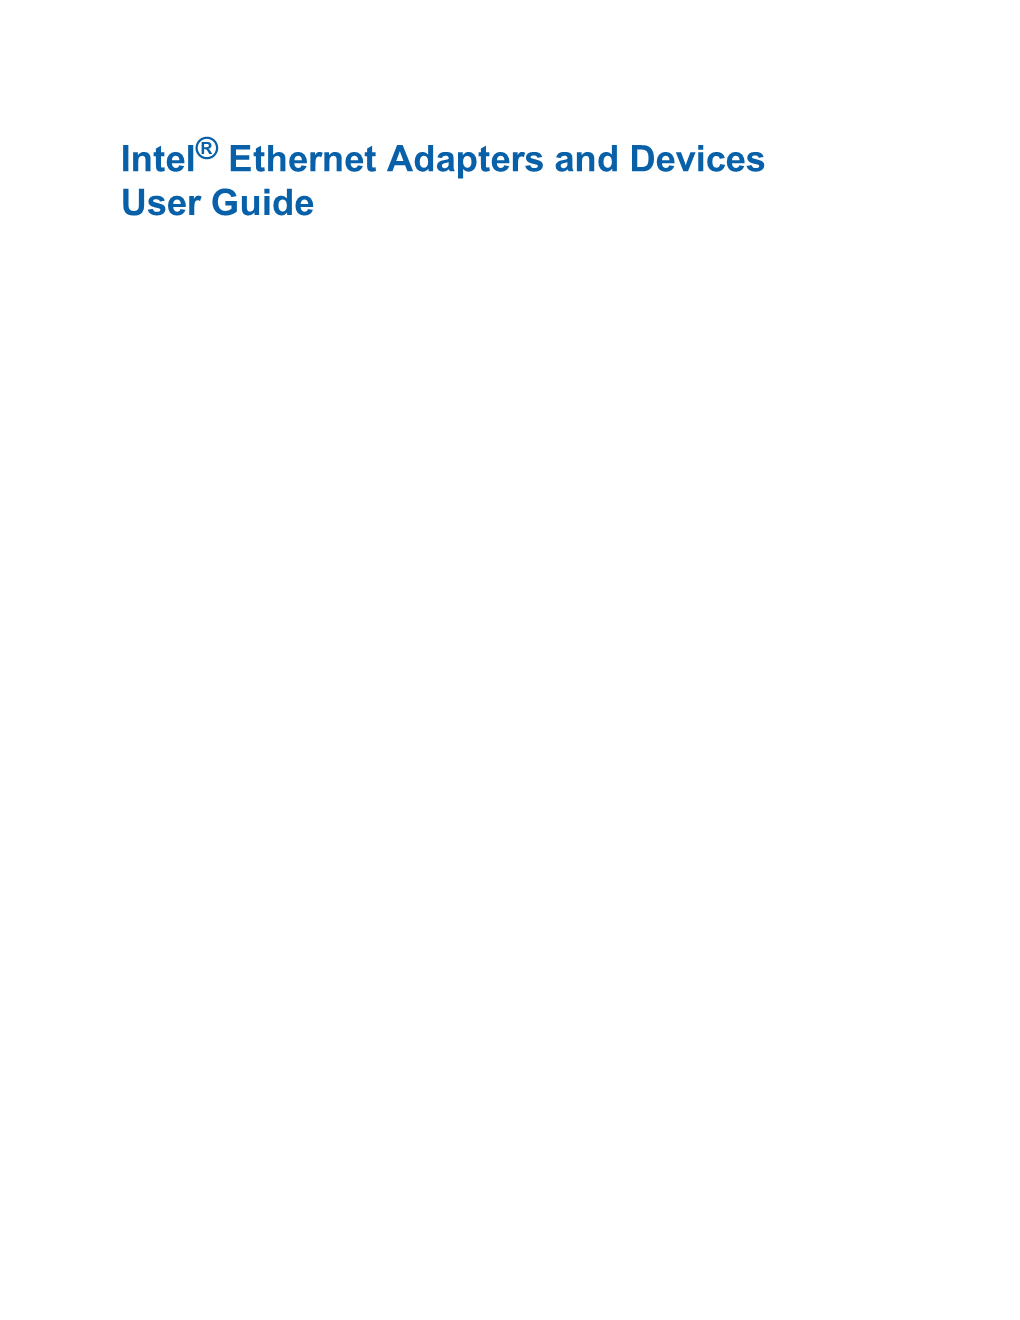 Intel® Ethernet Adapters and Devices User Guide Overview Welcome to the User Guide for Intel® Ethernet Adapters and Devices